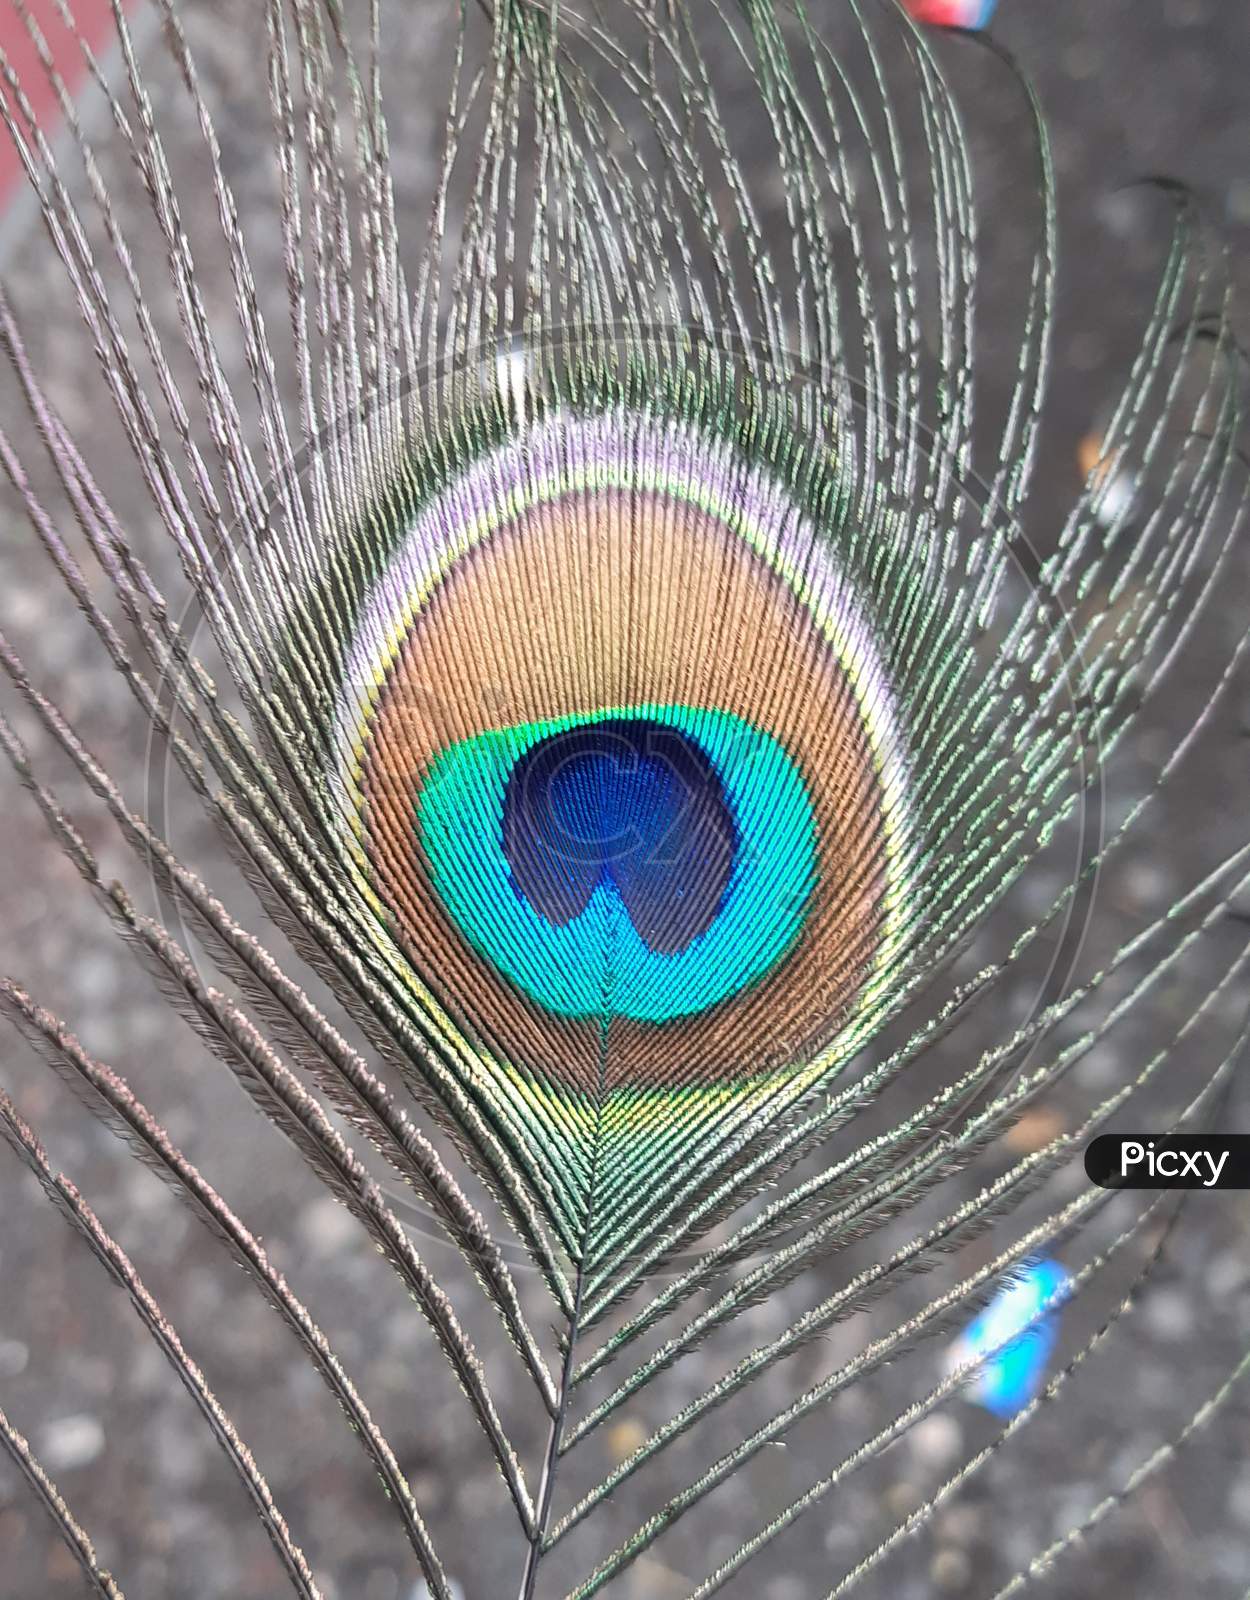 A peacock feather